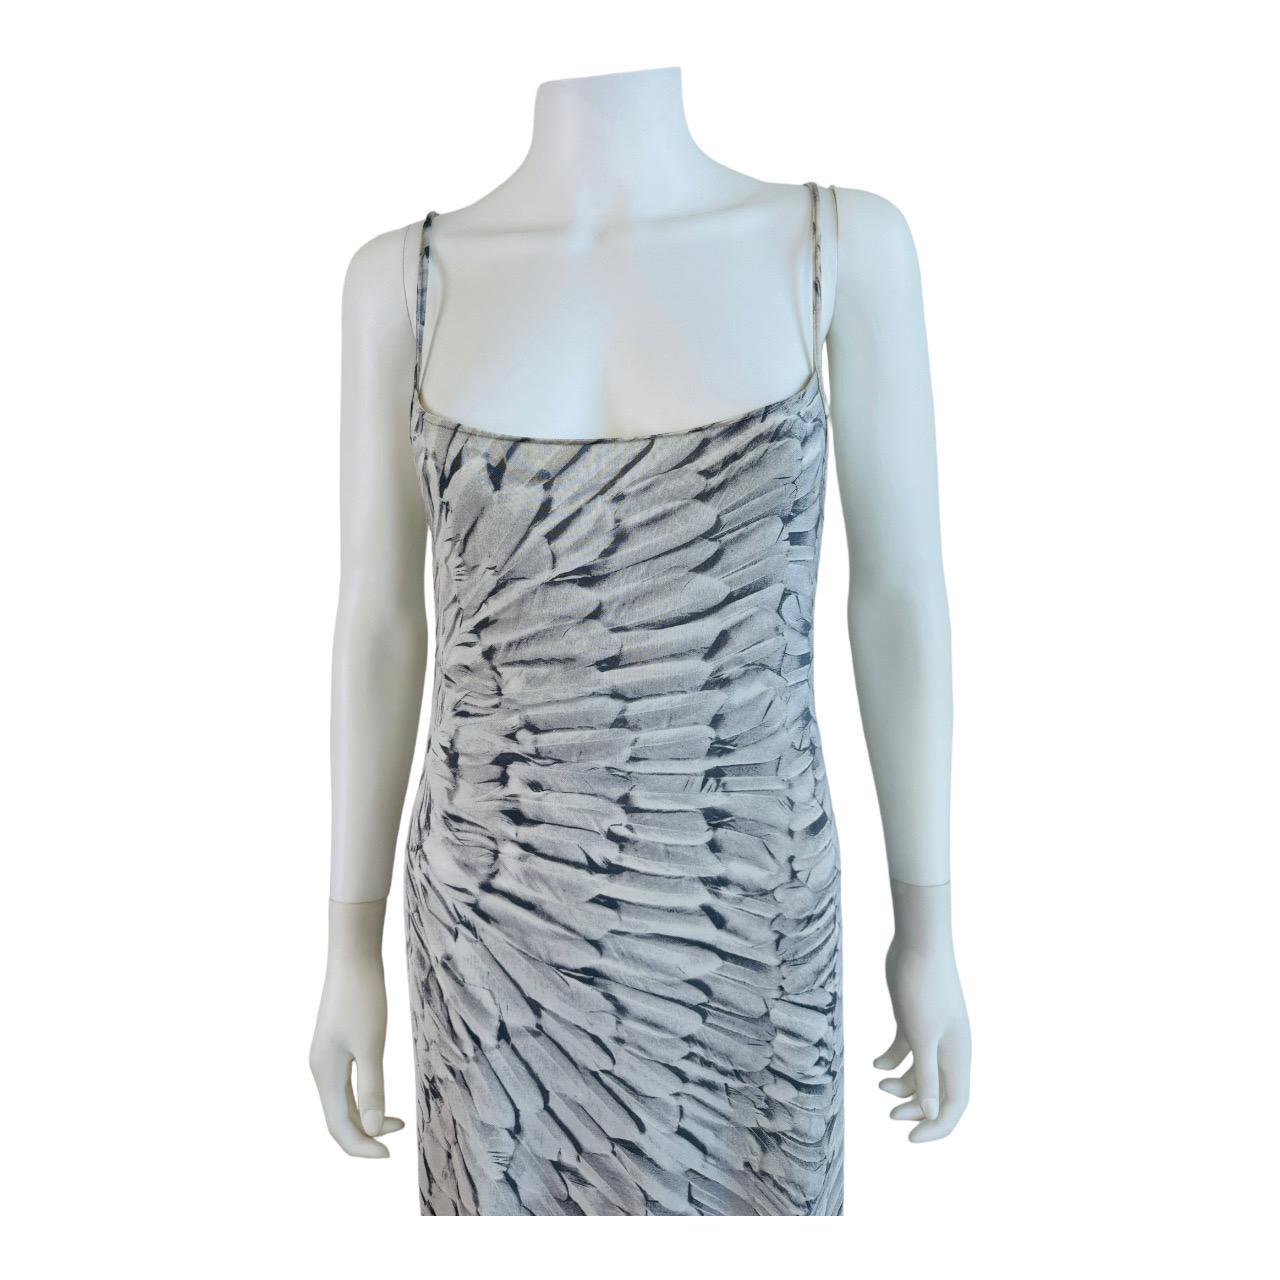 Vintage 1999 Roberto Cavalli Bodycon Grey Feather Print Maxi Dress In Excellent Condition For Sale In Denver, CO